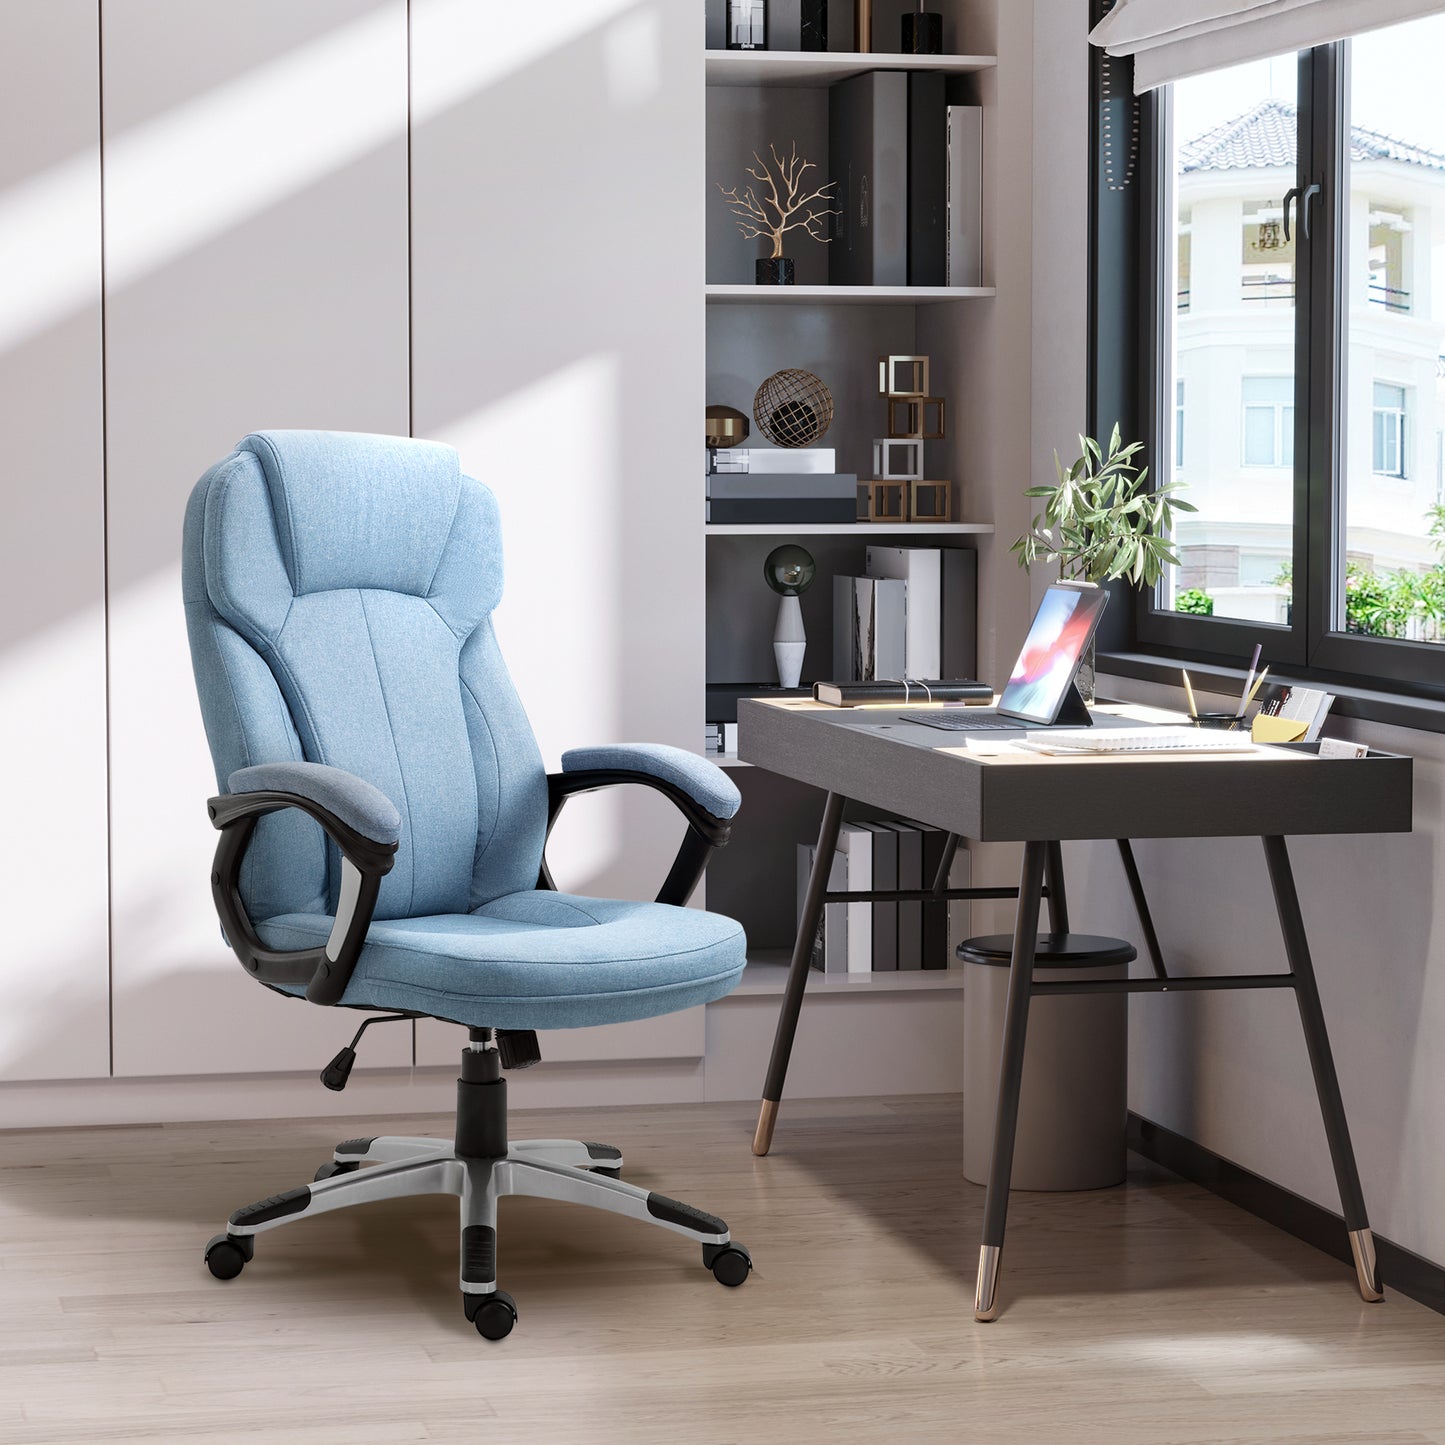 Vinsetto Linen Fabric Home Office Chair, Height Adjustable Computer Chair, Blue